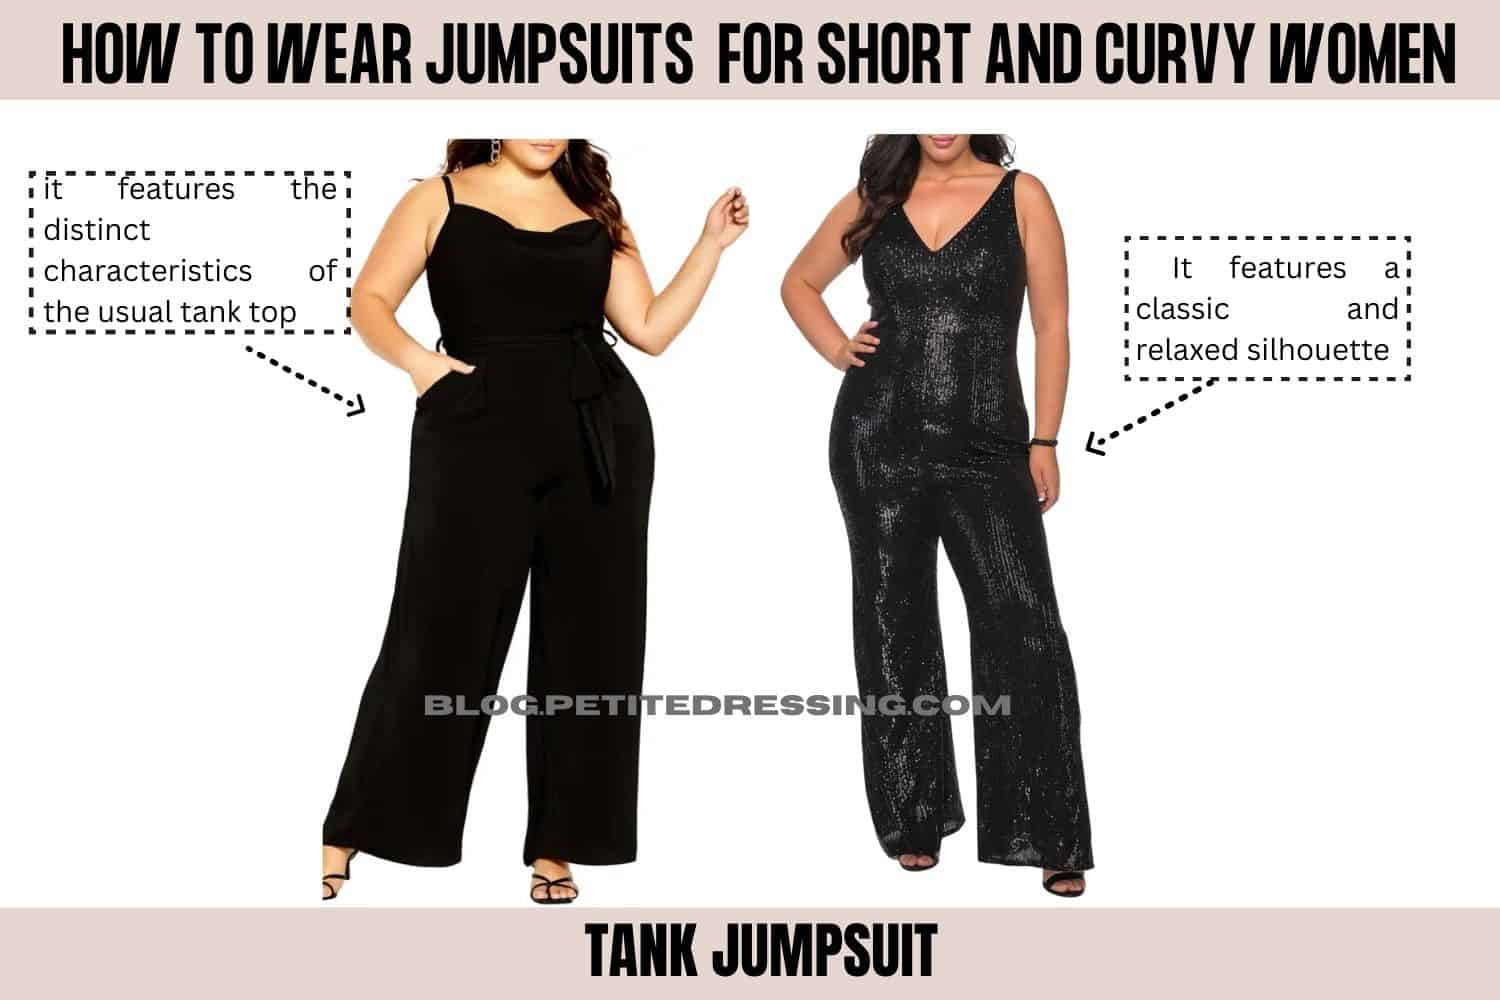 Jumpsuit Guide for Curvy Women